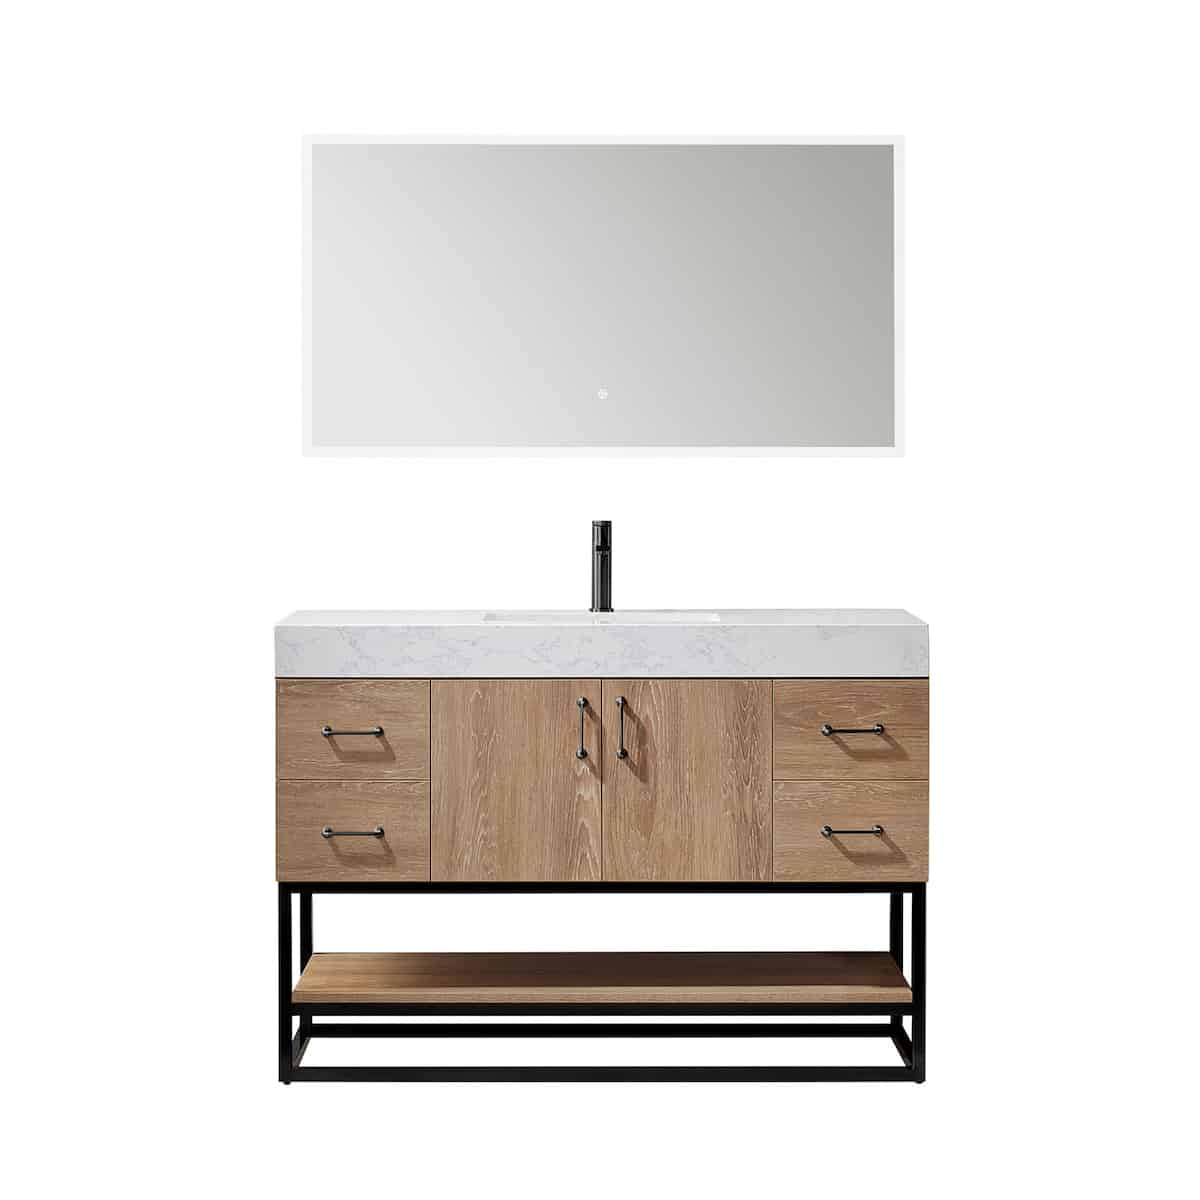 Vinnova Alistair 48 Inch Freestanding Single Vanity in North American Oak and Matte Black Frame with White Grain Stone Countertop With Mirror 789048B-NO-GW